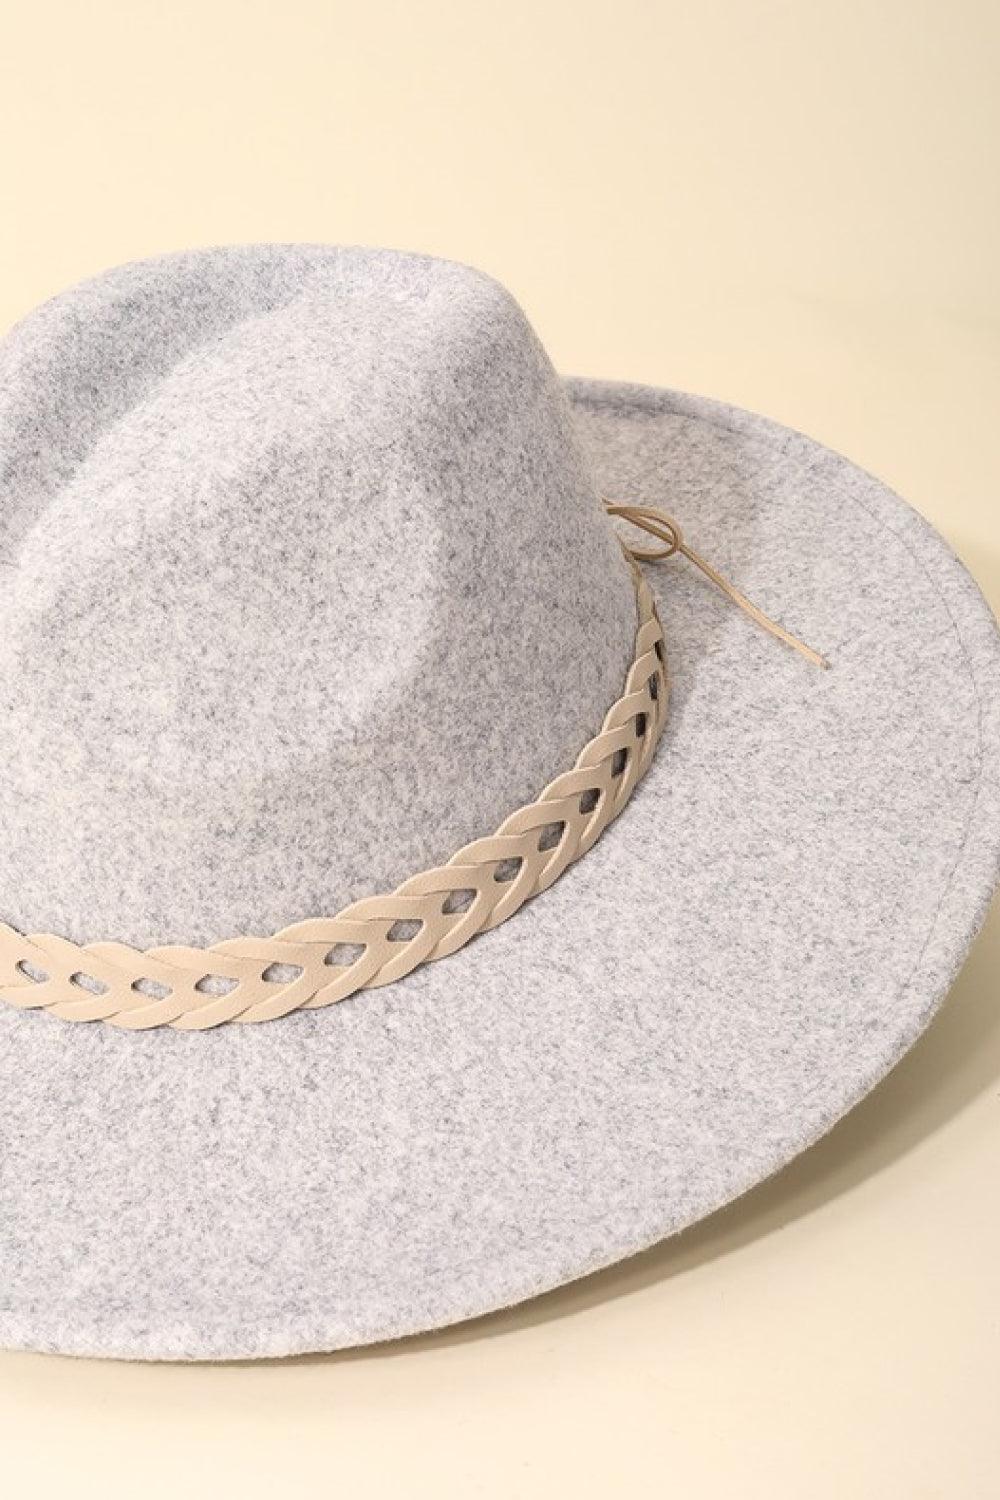 Woven Together | Braided Strap Fedora - Statement Piece NY Accessories, cute accessories, cute fashion accessories, Fame, final sale, Ship from USA, Statement Accessories Hats